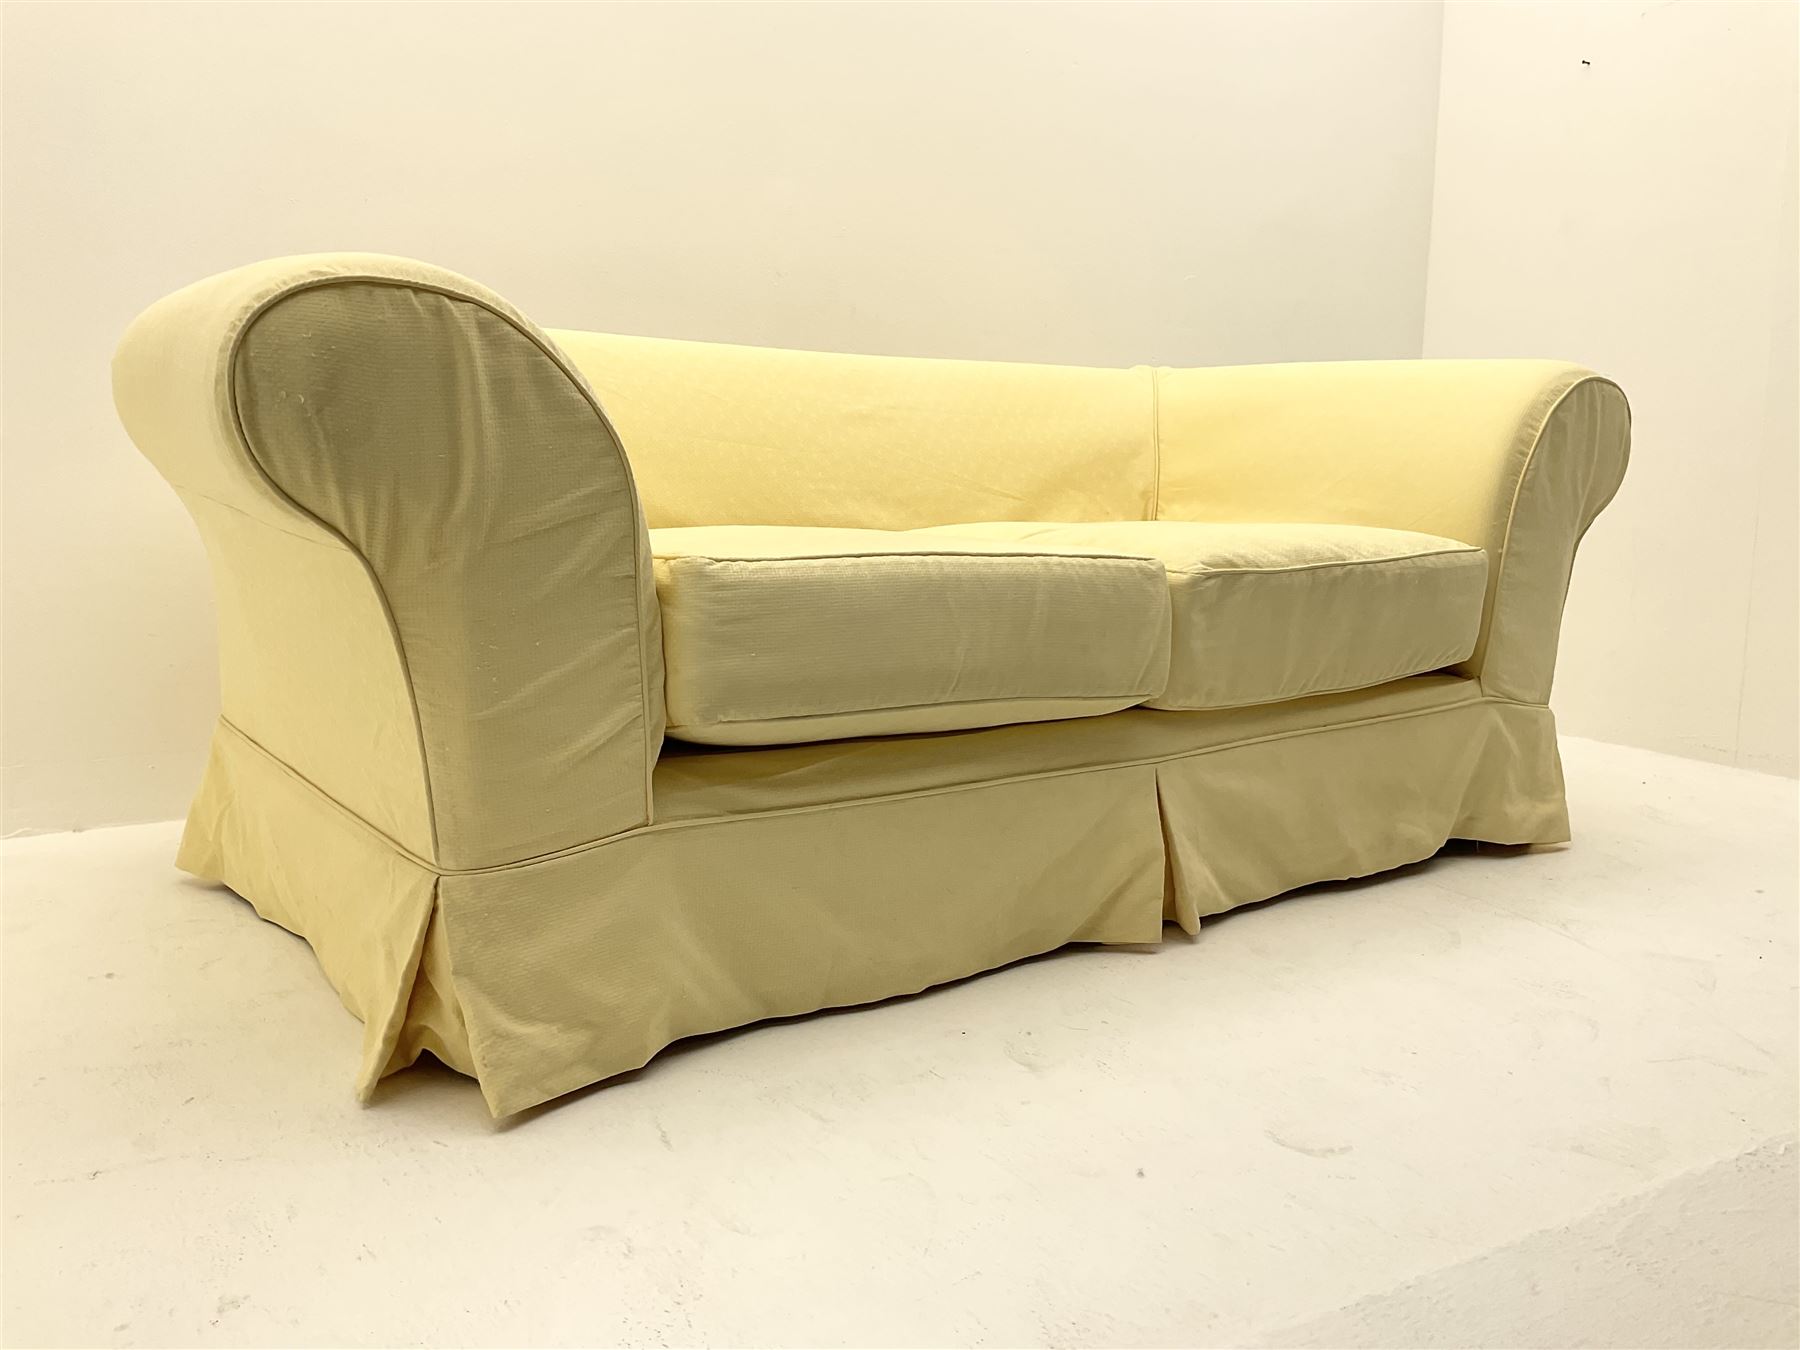 Pair traditional two seat sofas upholstered in pale yellow cover - Image 2 of 6